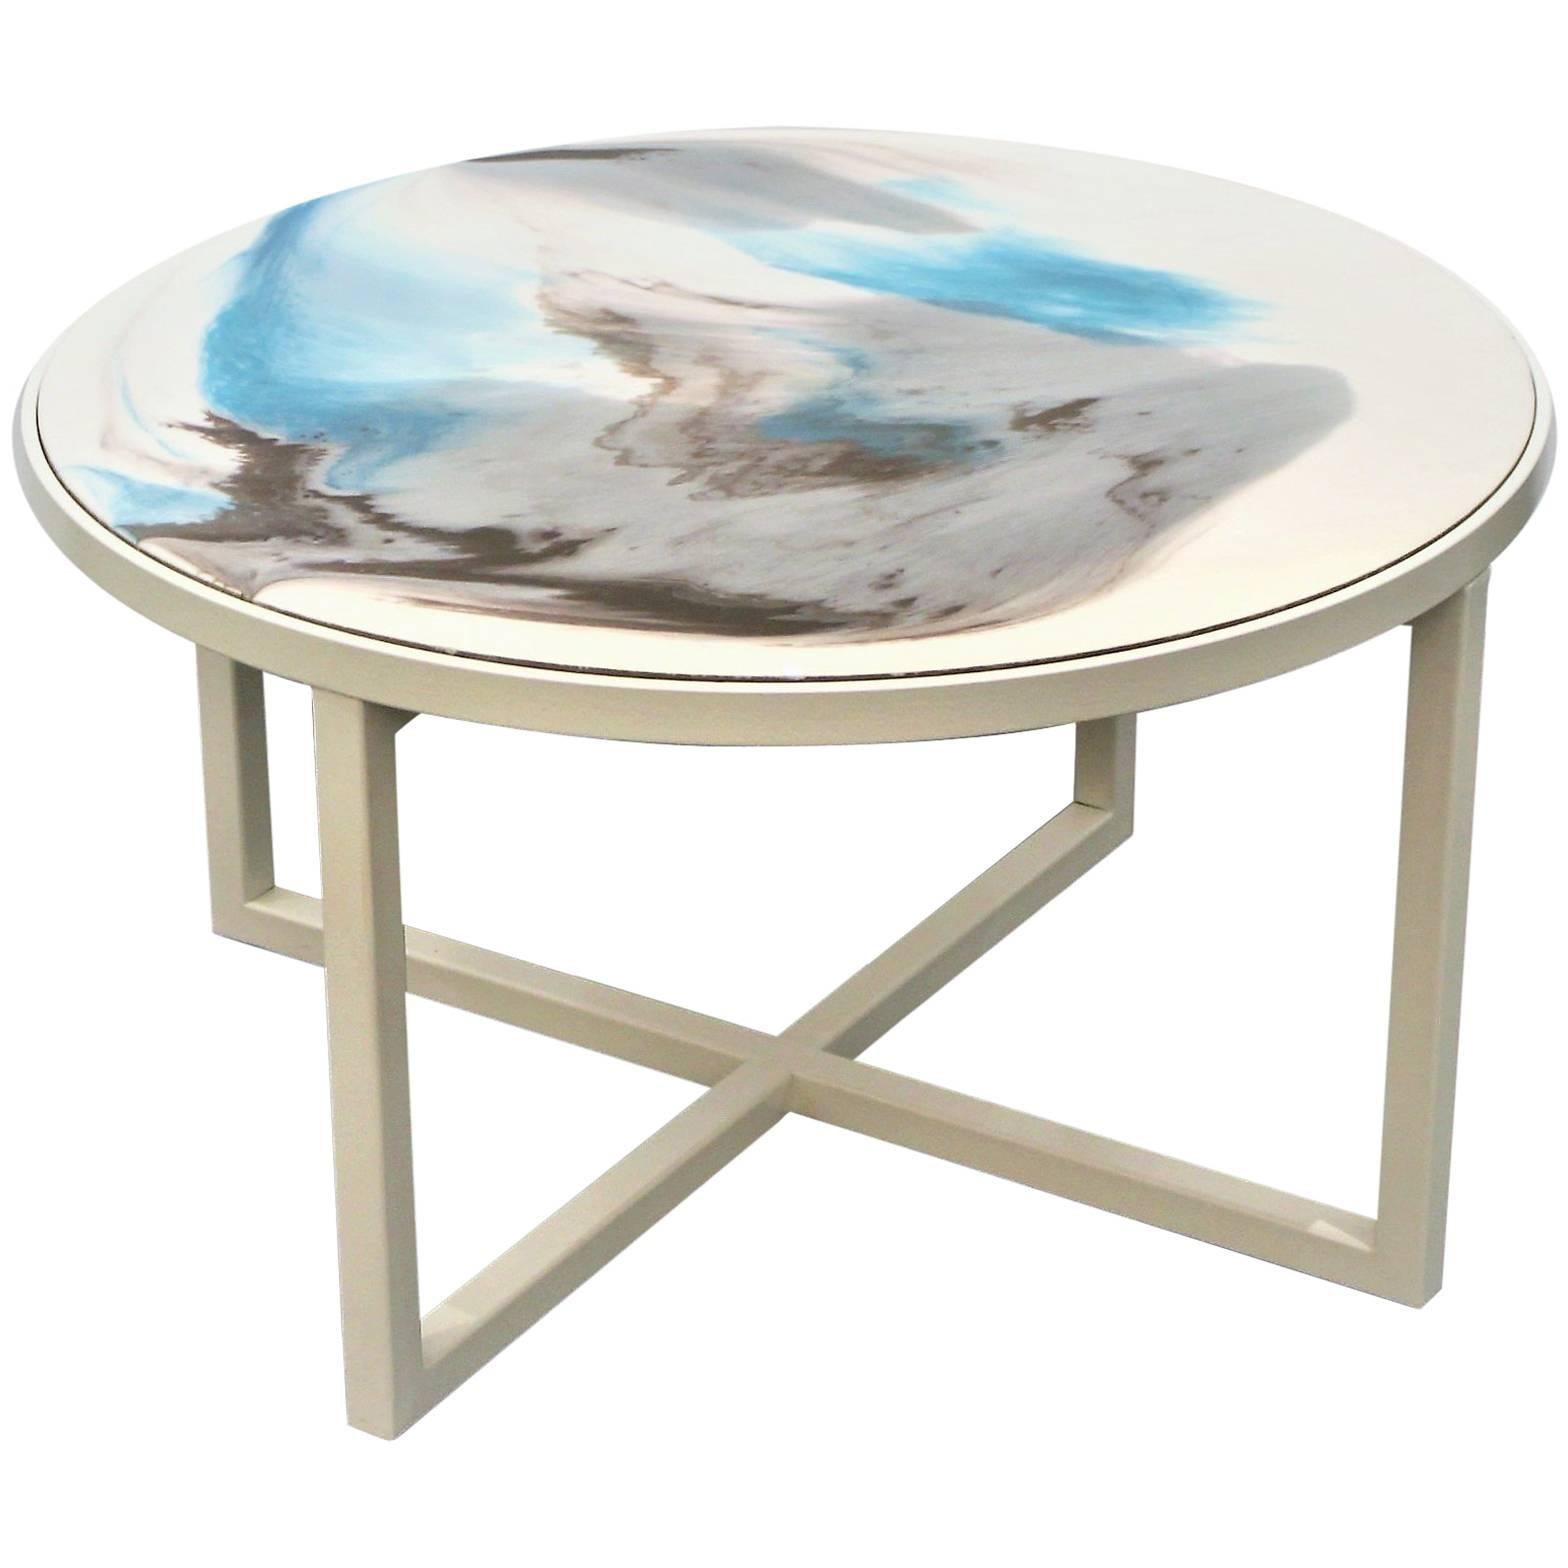 Contemporary Resin Coffee Table "Seashells" on Off-White Satin Steel Base For Sale